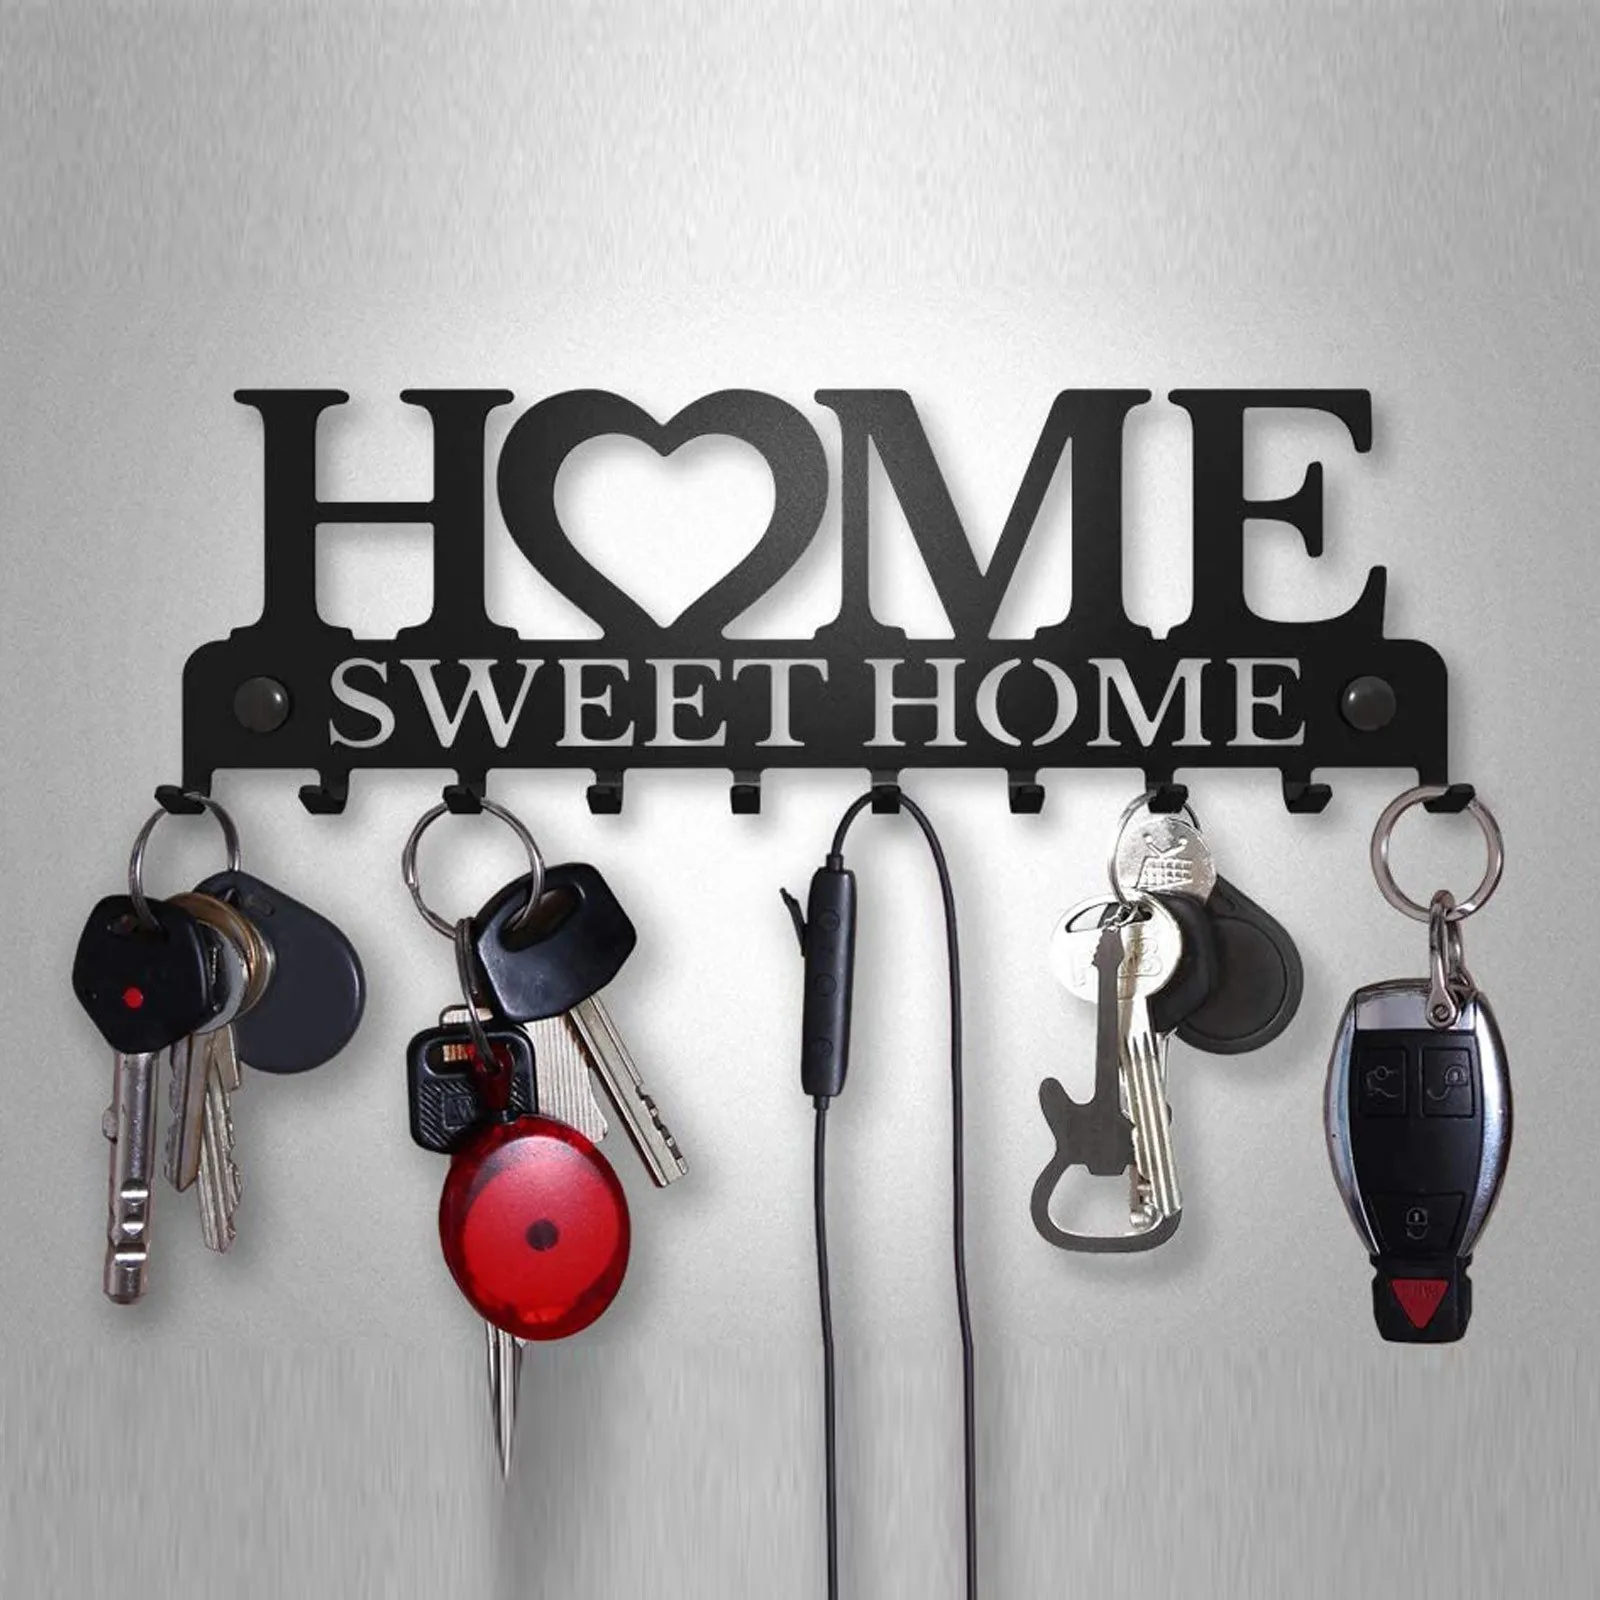 

Black Balcony Metal Wall-mounted Clothes Drying Rack With 10 Hooks Coat Rack "Home Sweet Home" Letter Decorative Key Hook Holder